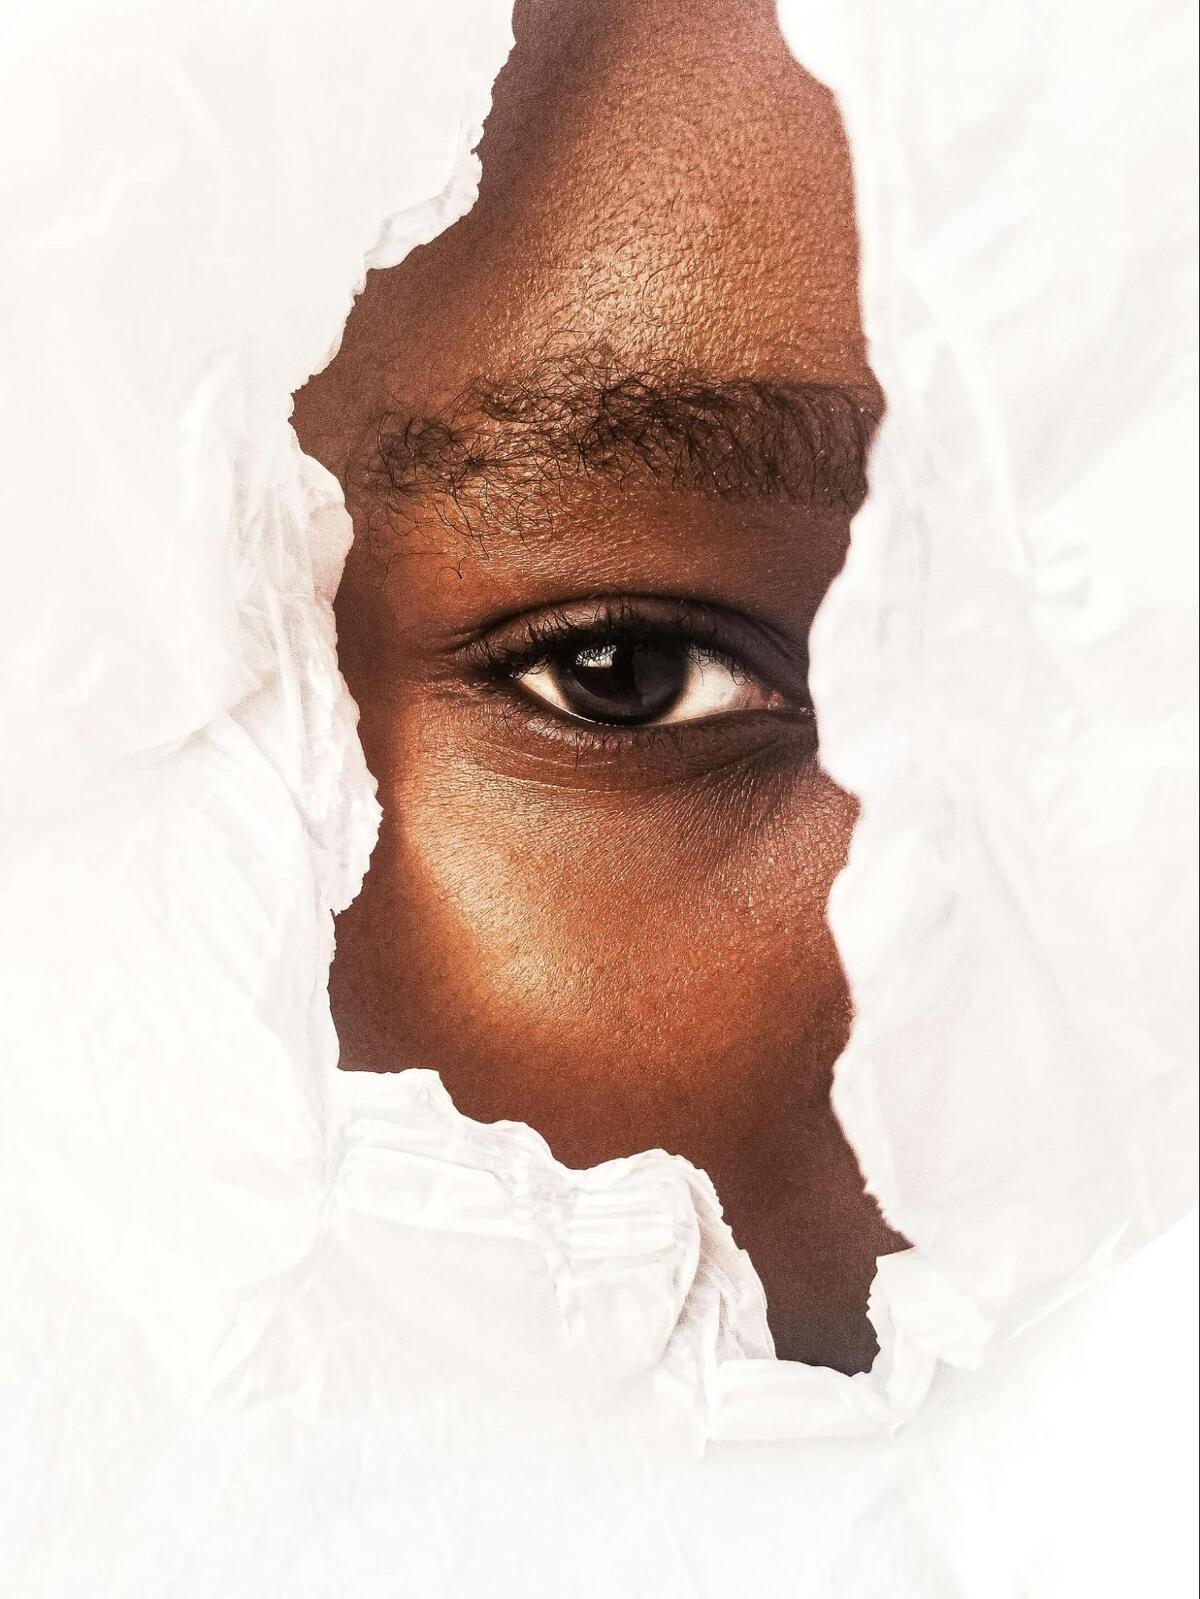 part of the face of a black person peeking through torn white paper